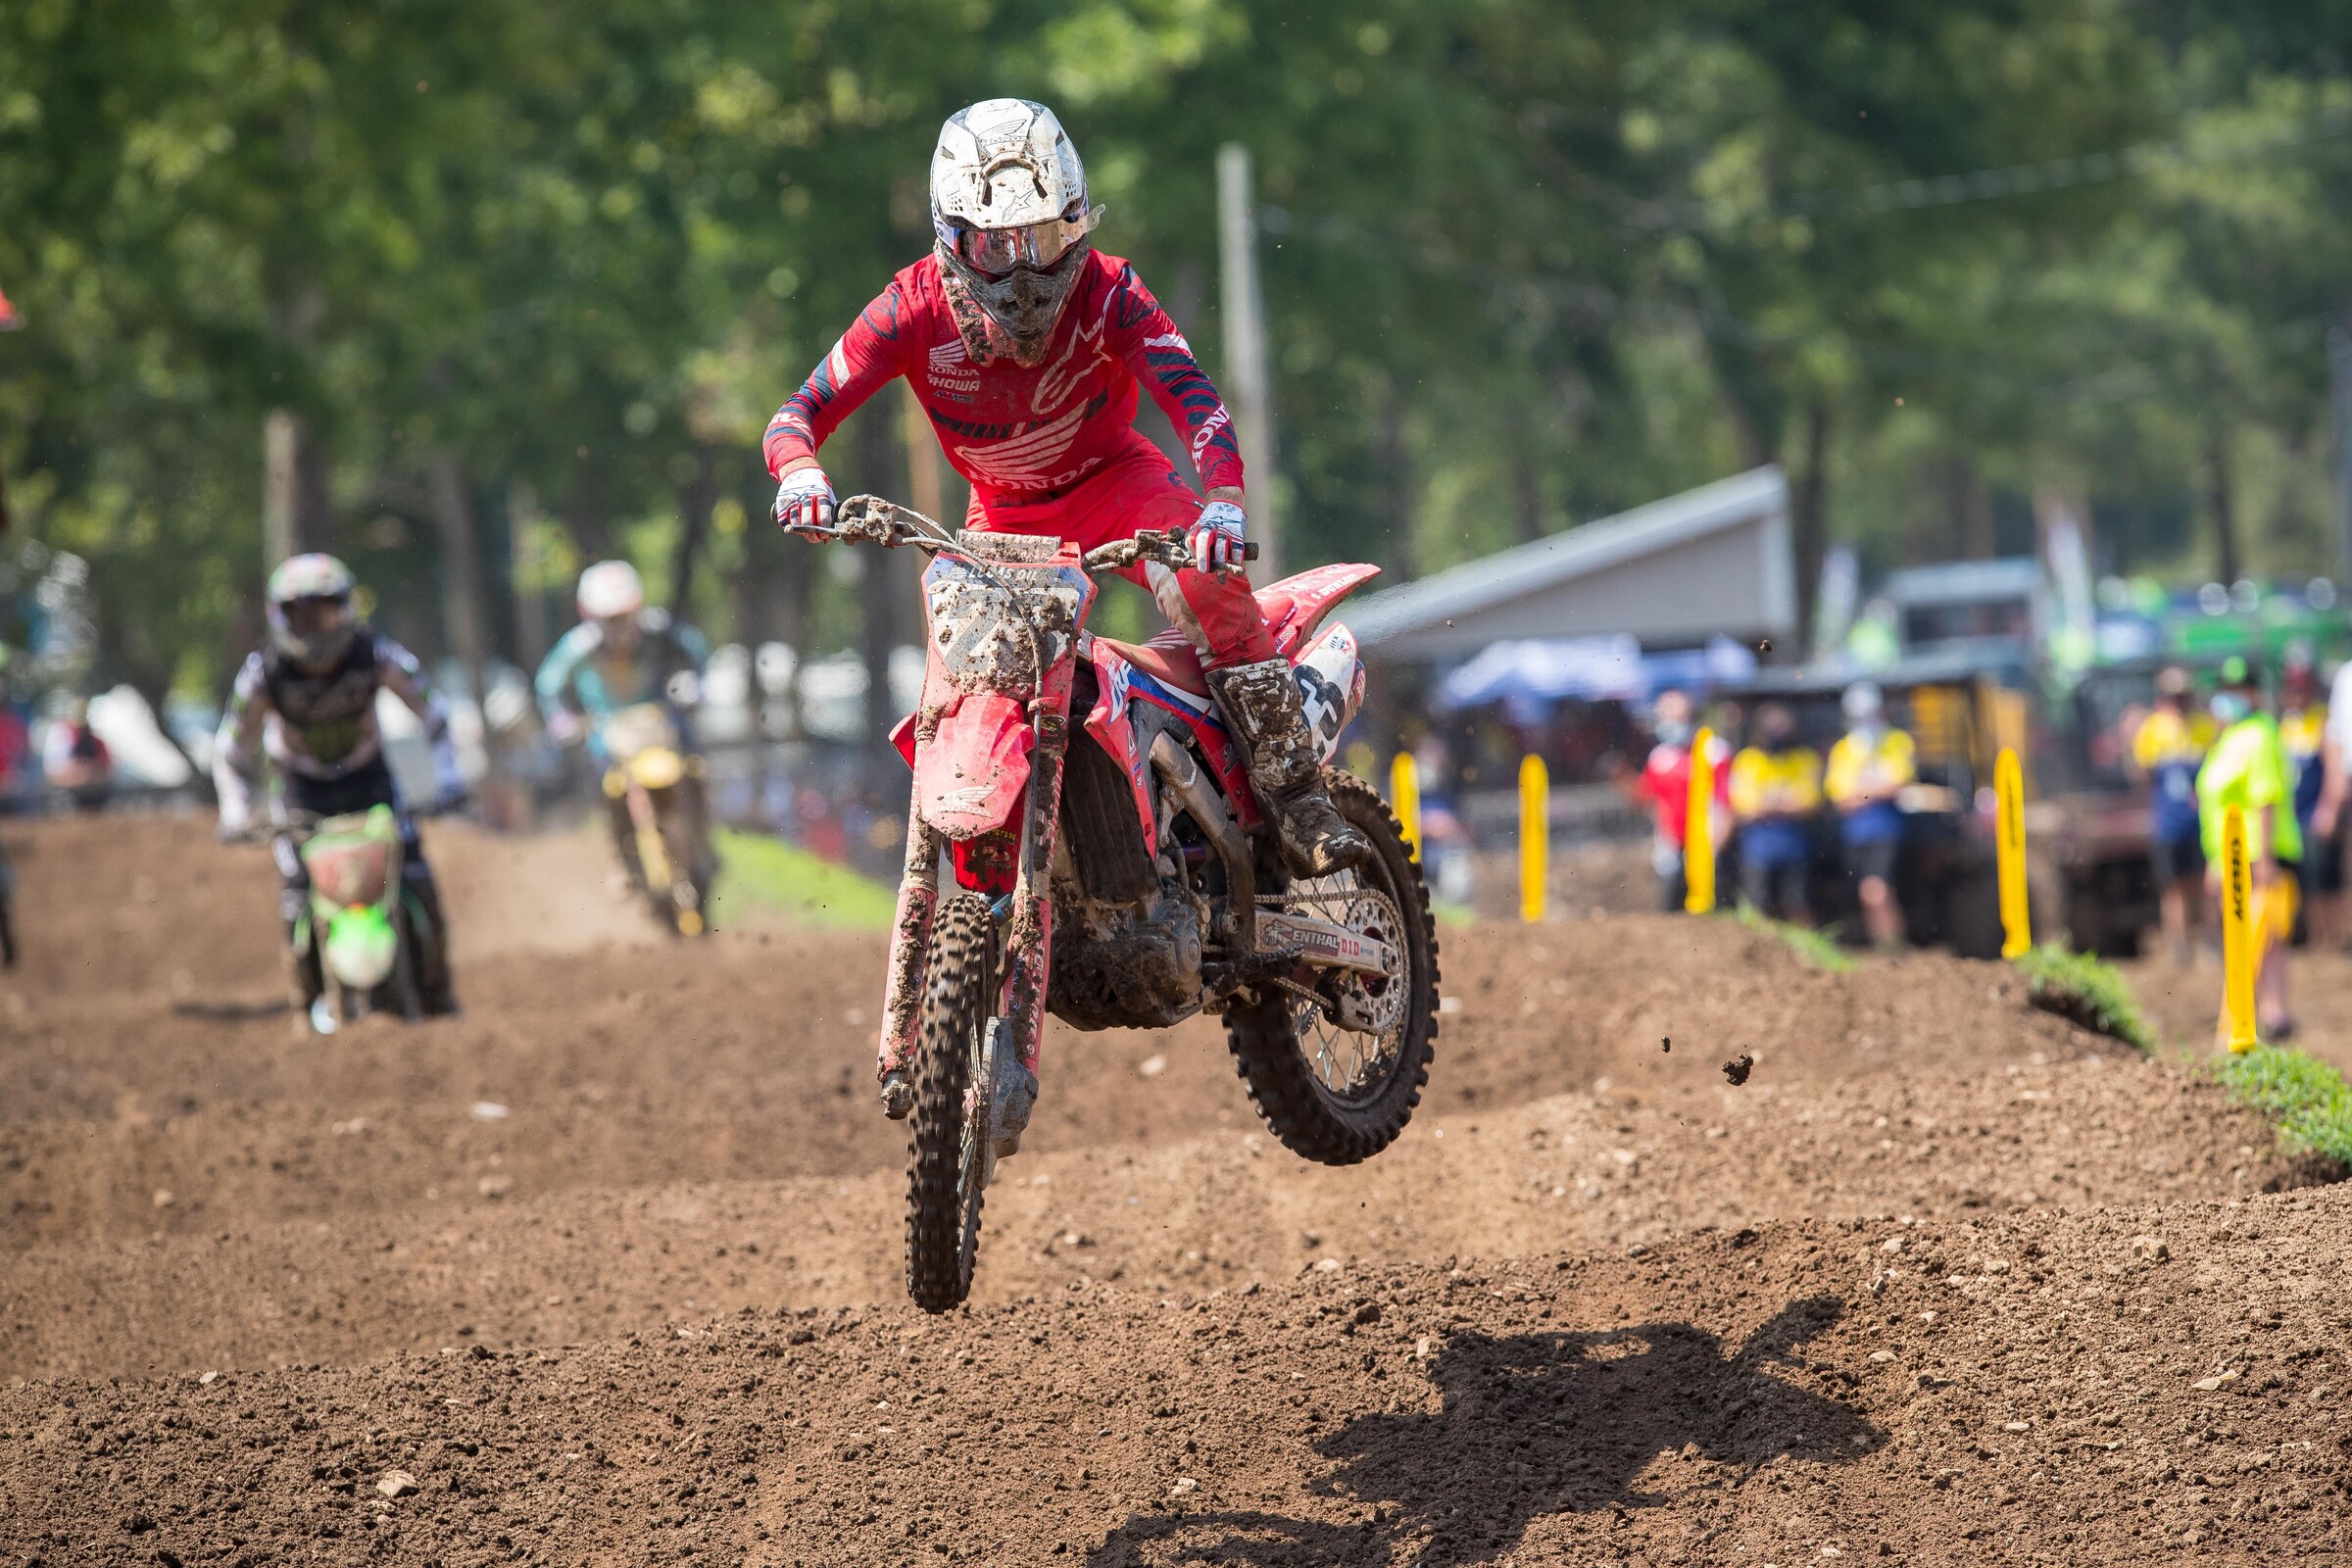 Chase Sexton Qualifies Fastest, Makes Mistakes in 450 Motocross Debut ...